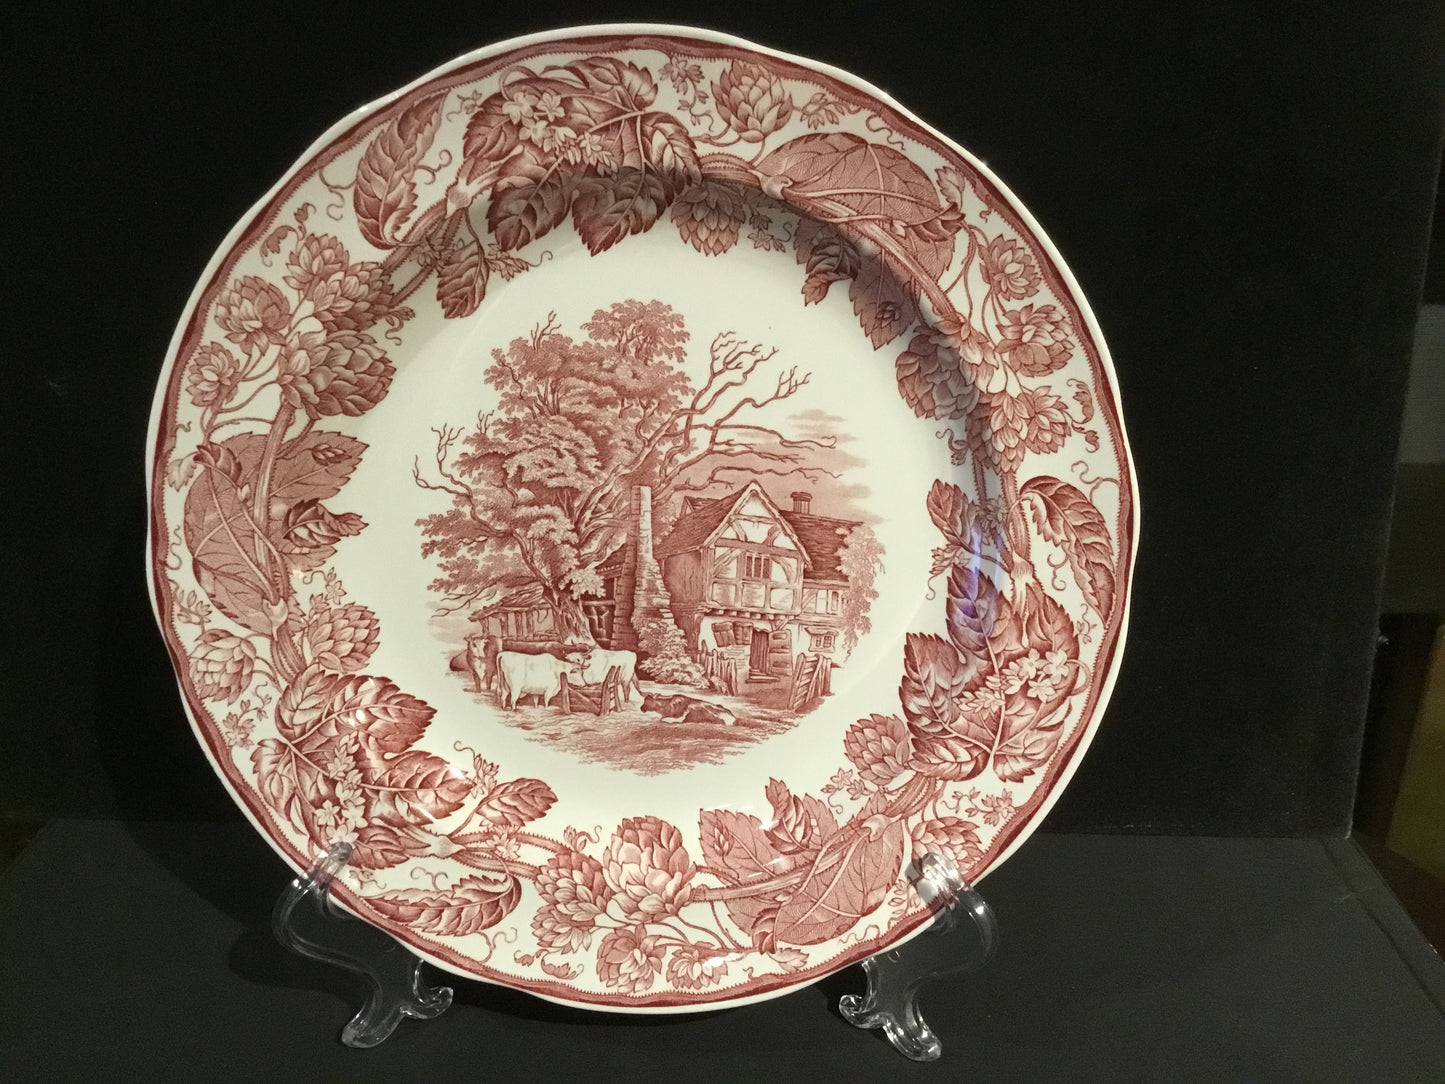 Dinner Plate Archive Collection Cranberry "Rural Scenes" by SPODE